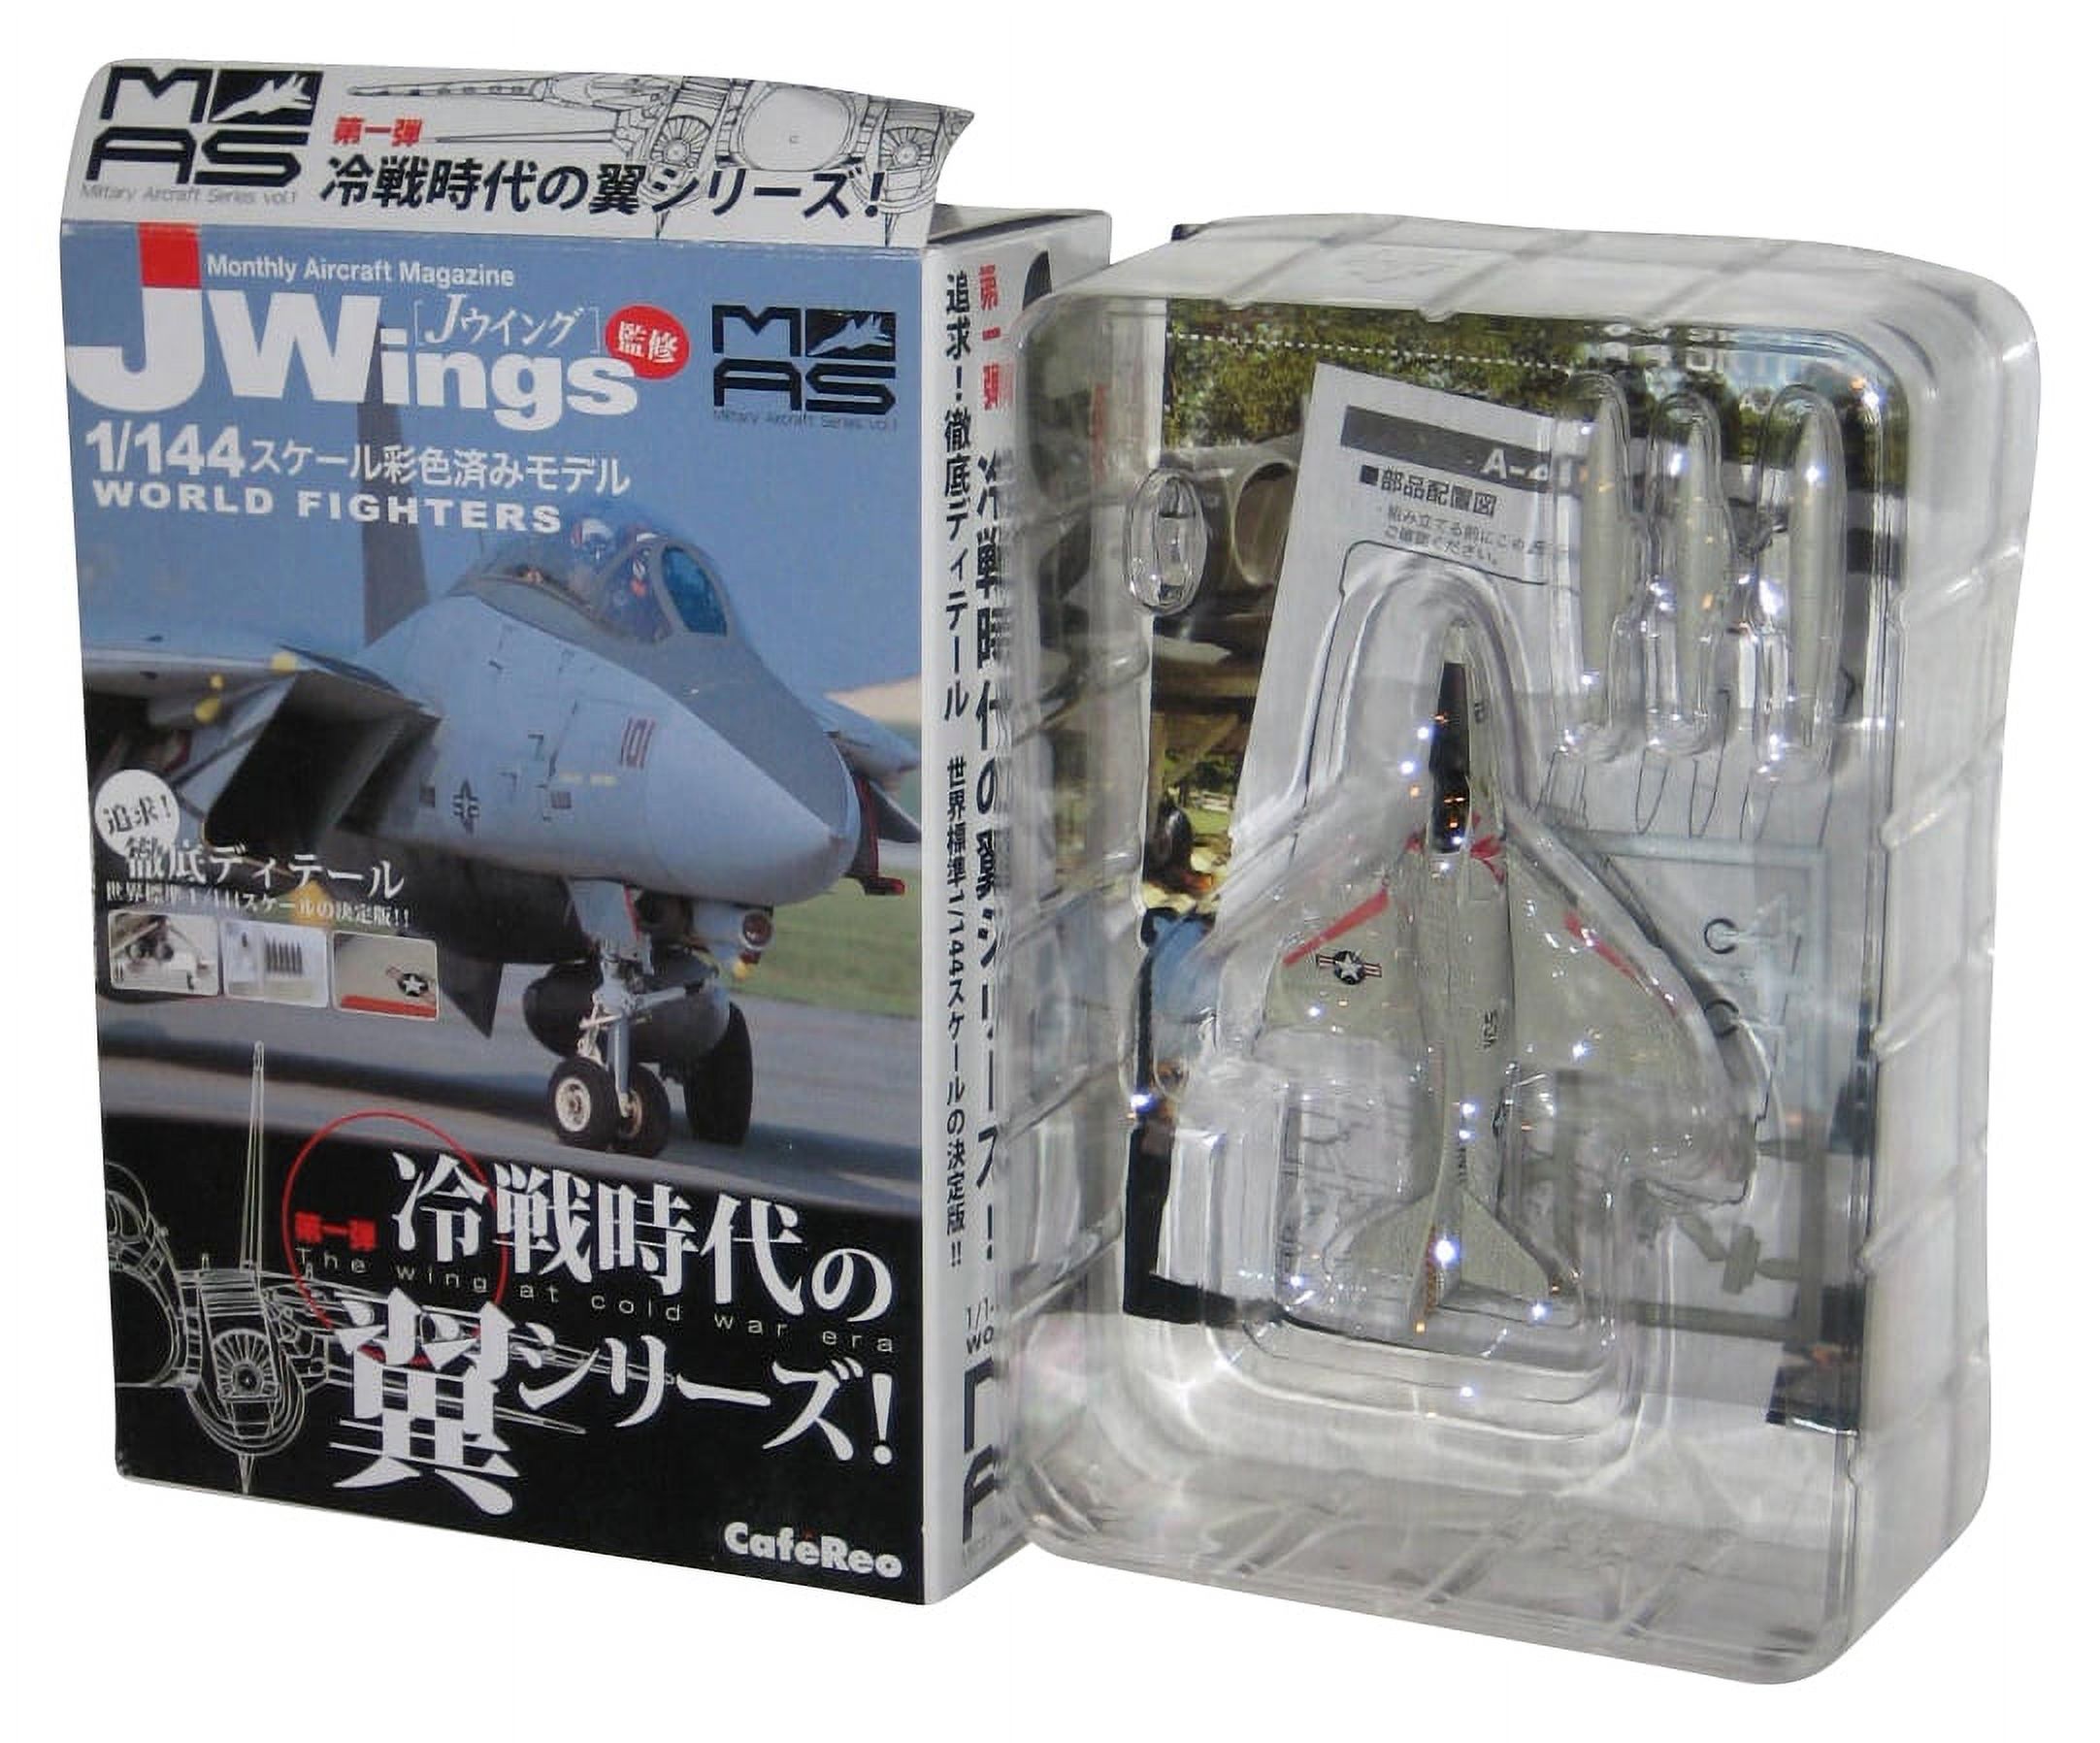 Cafereo J-Wings Wing At Cold War Era World Fighters Military Aircraft Series 1/144 A-4 Skyhawk Toy Plane - image 1 of 2